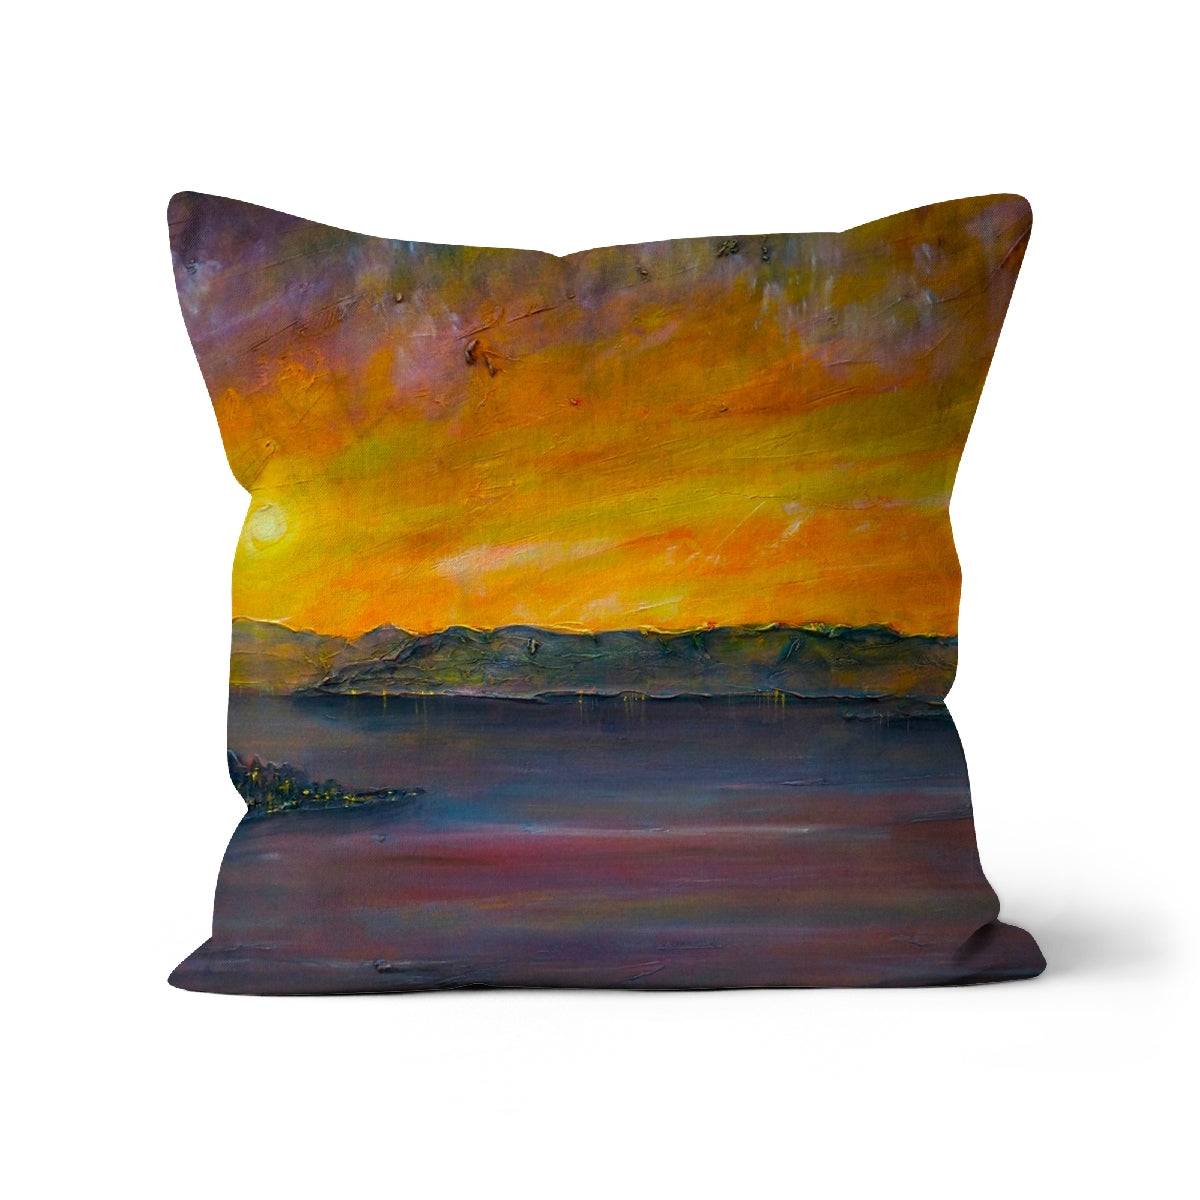 Sunset Over Gourock Art Gifts Cushion-Cushions-River Clyde Art Gallery-Canvas-24"x24"-Paintings, Prints, Homeware, Art Gifts From Scotland By Scottish Artist Kevin Hunter